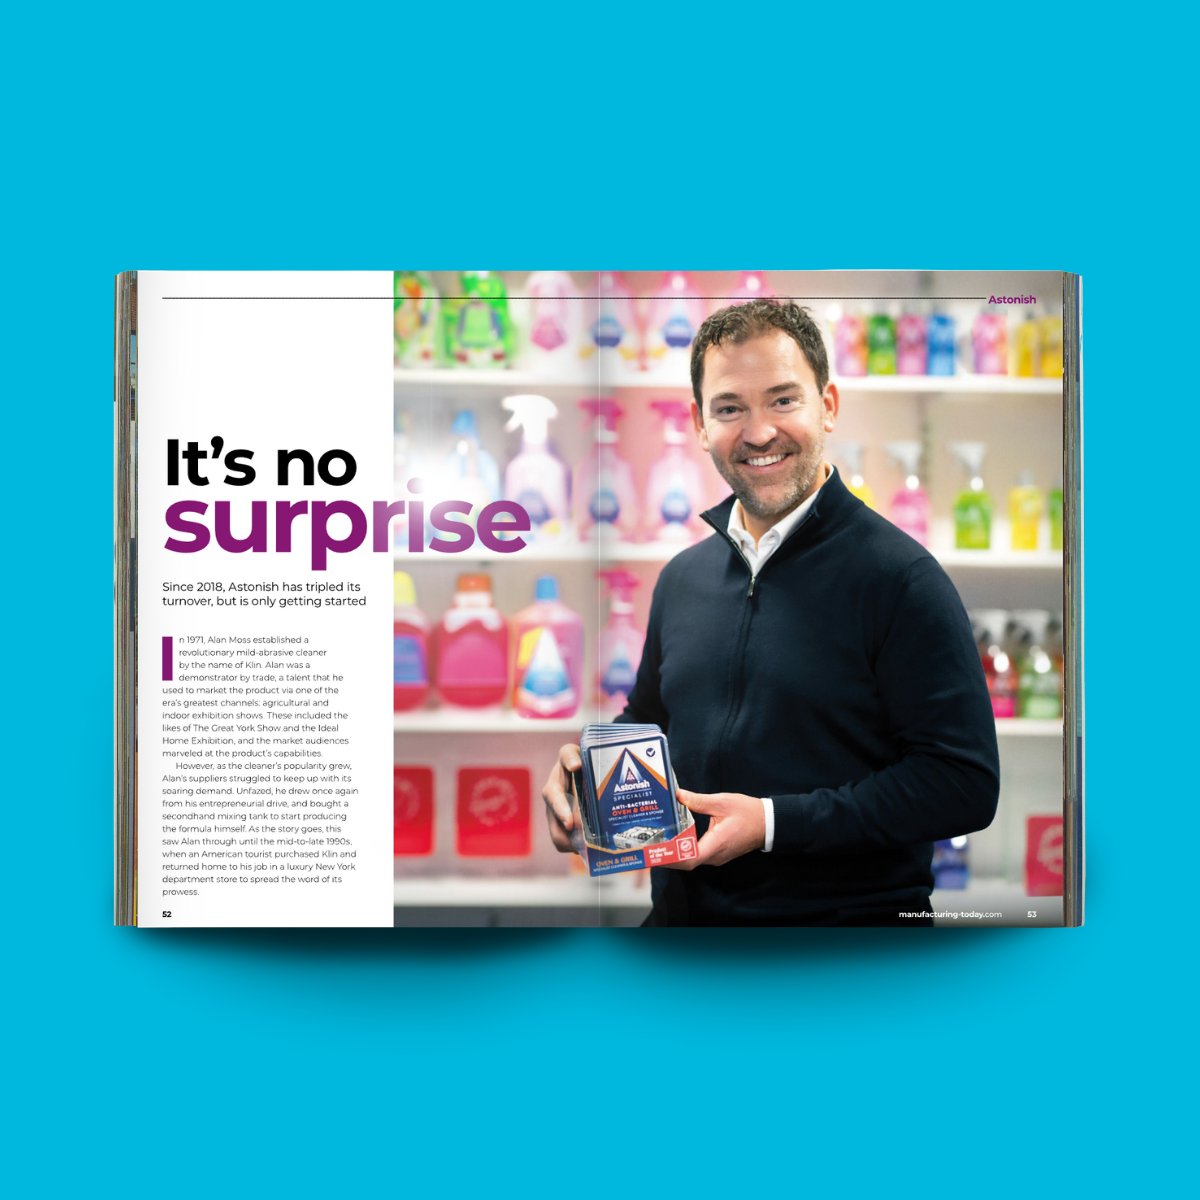 .@Astonishcleaner is one of the earliest UK cleaning brands, with a strong reputation for being family ran and best-in-class. Howard Moss, CEO, shared insight into the company's history, current investments, and plans for the future in our recent issue. ow.ly/kaeX50PzNb6